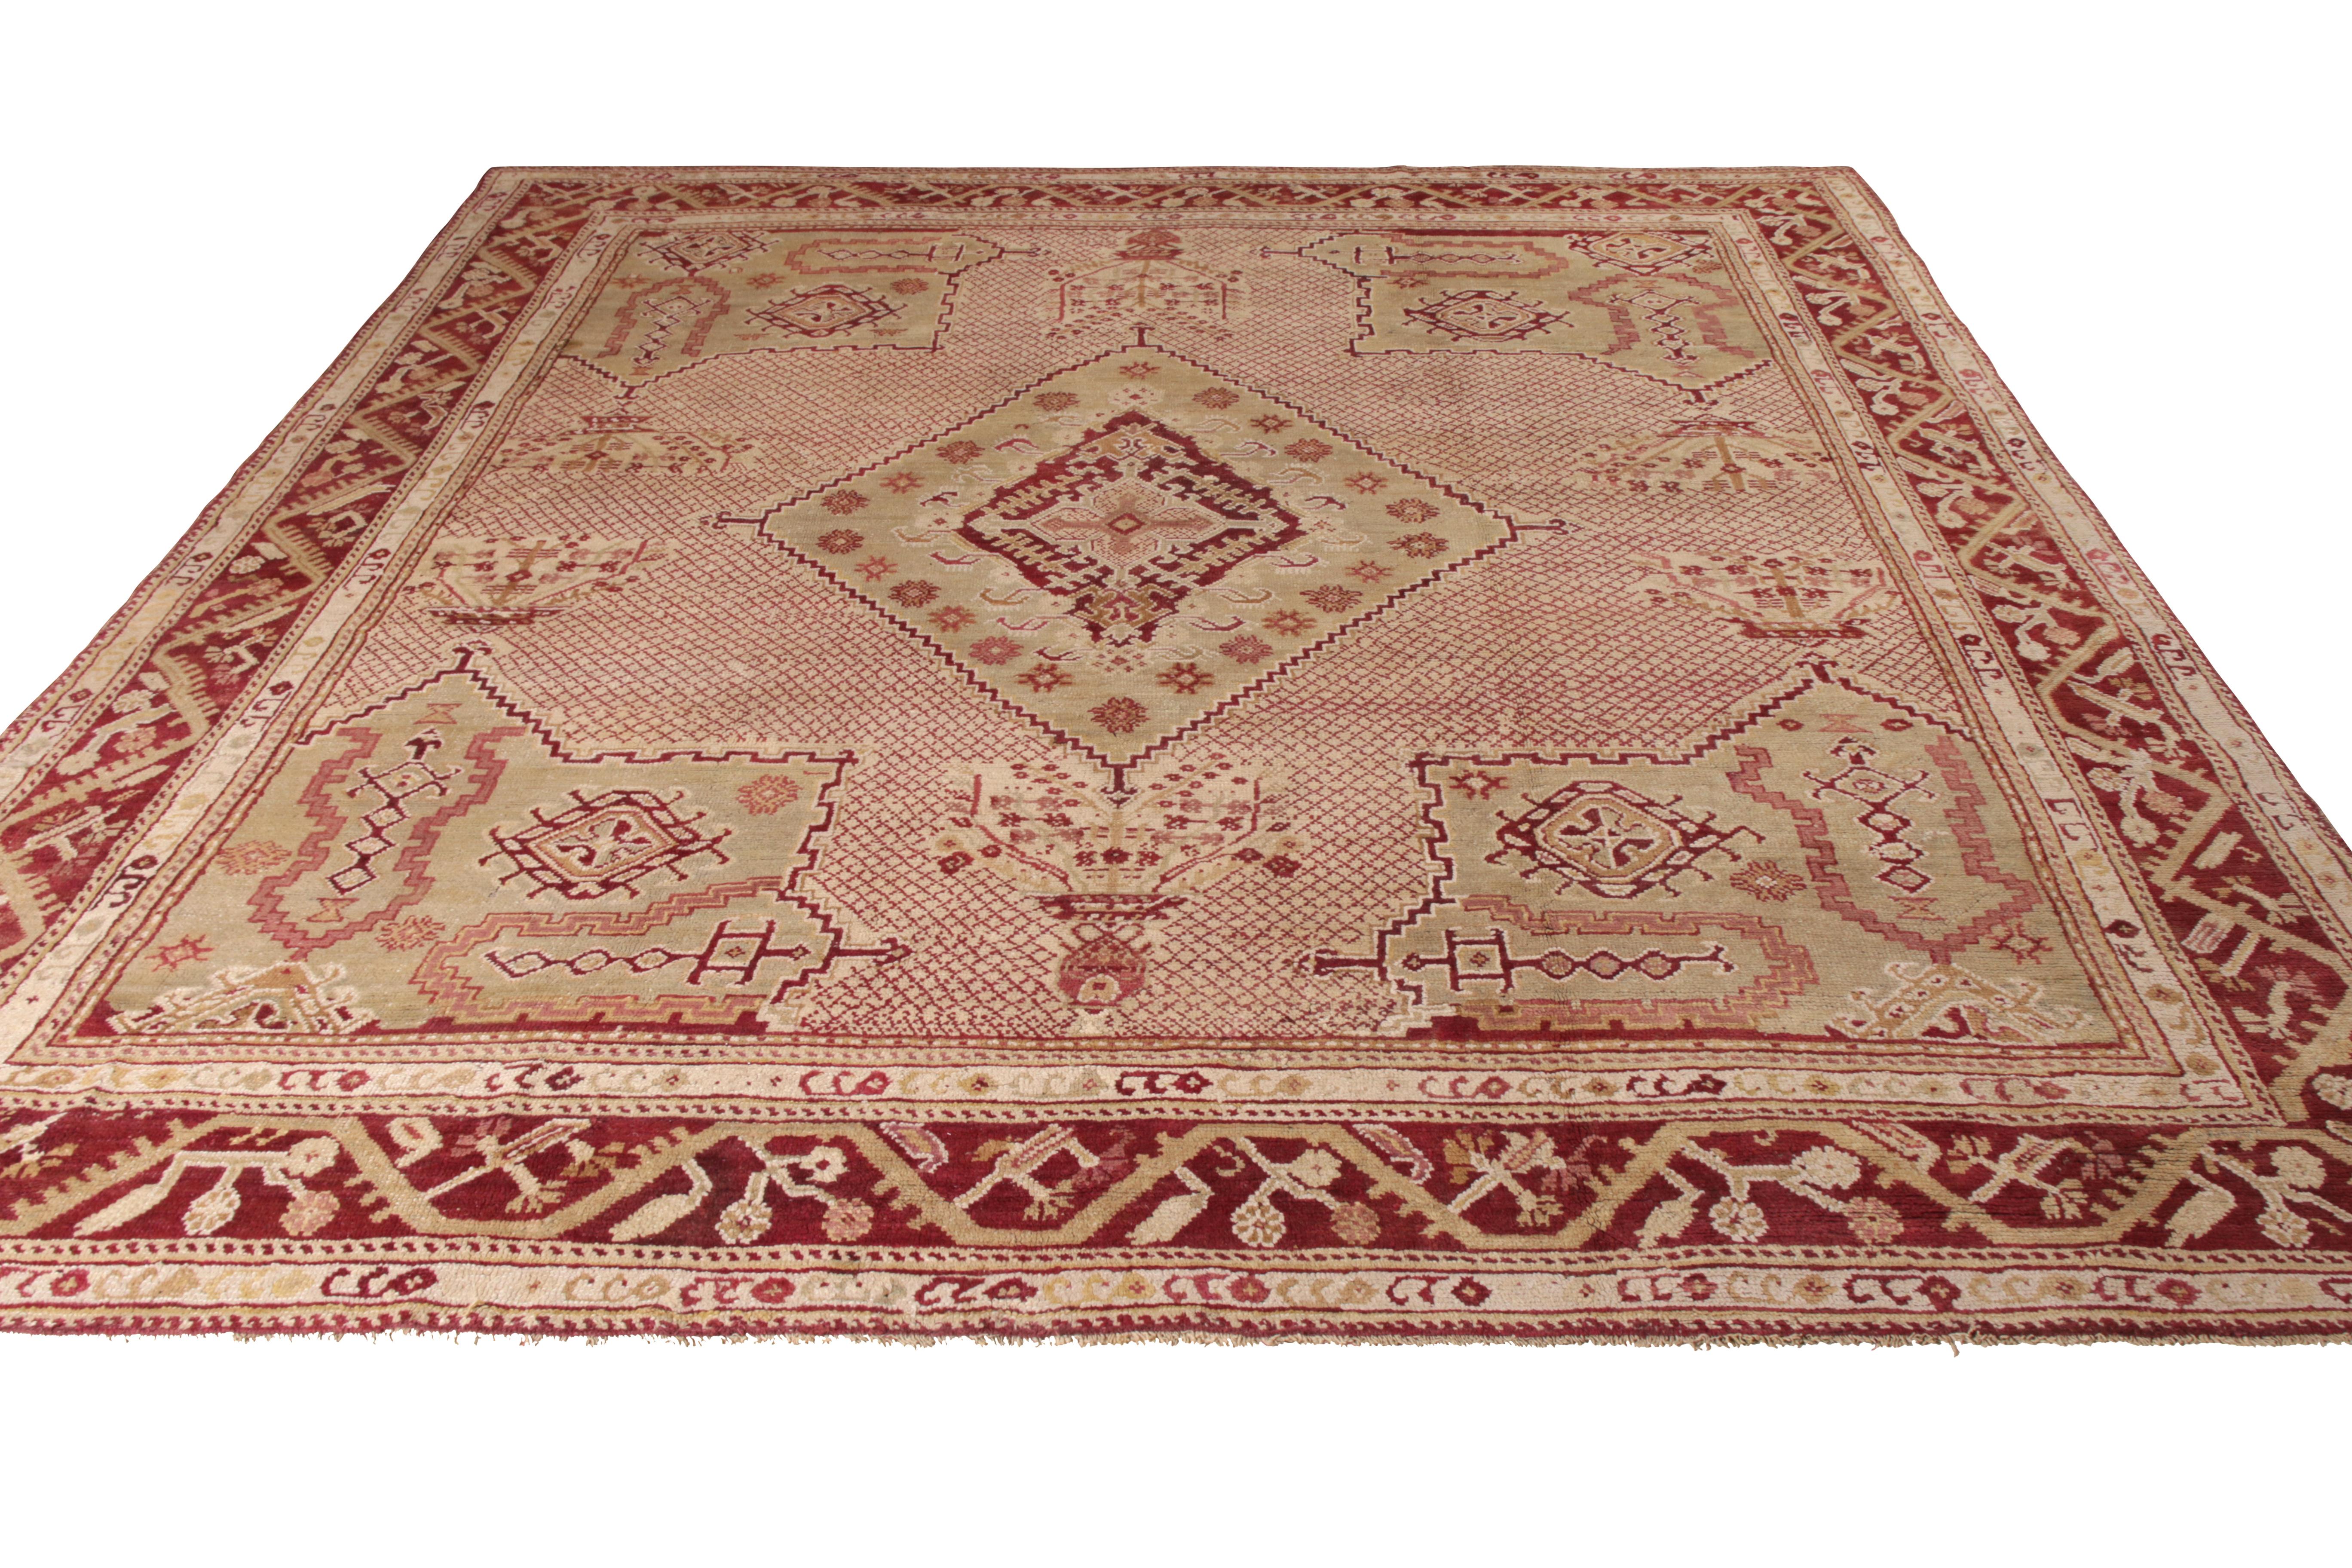 An antique 13x14 Oushak rug of exceptional rarity, hand knotted in a healthy, lustrous wool from Turkey circa 1910-1920. One of the most phenomenal examples of scale and delicious colorway our principal has seen as a connoisseur. The uncommon play